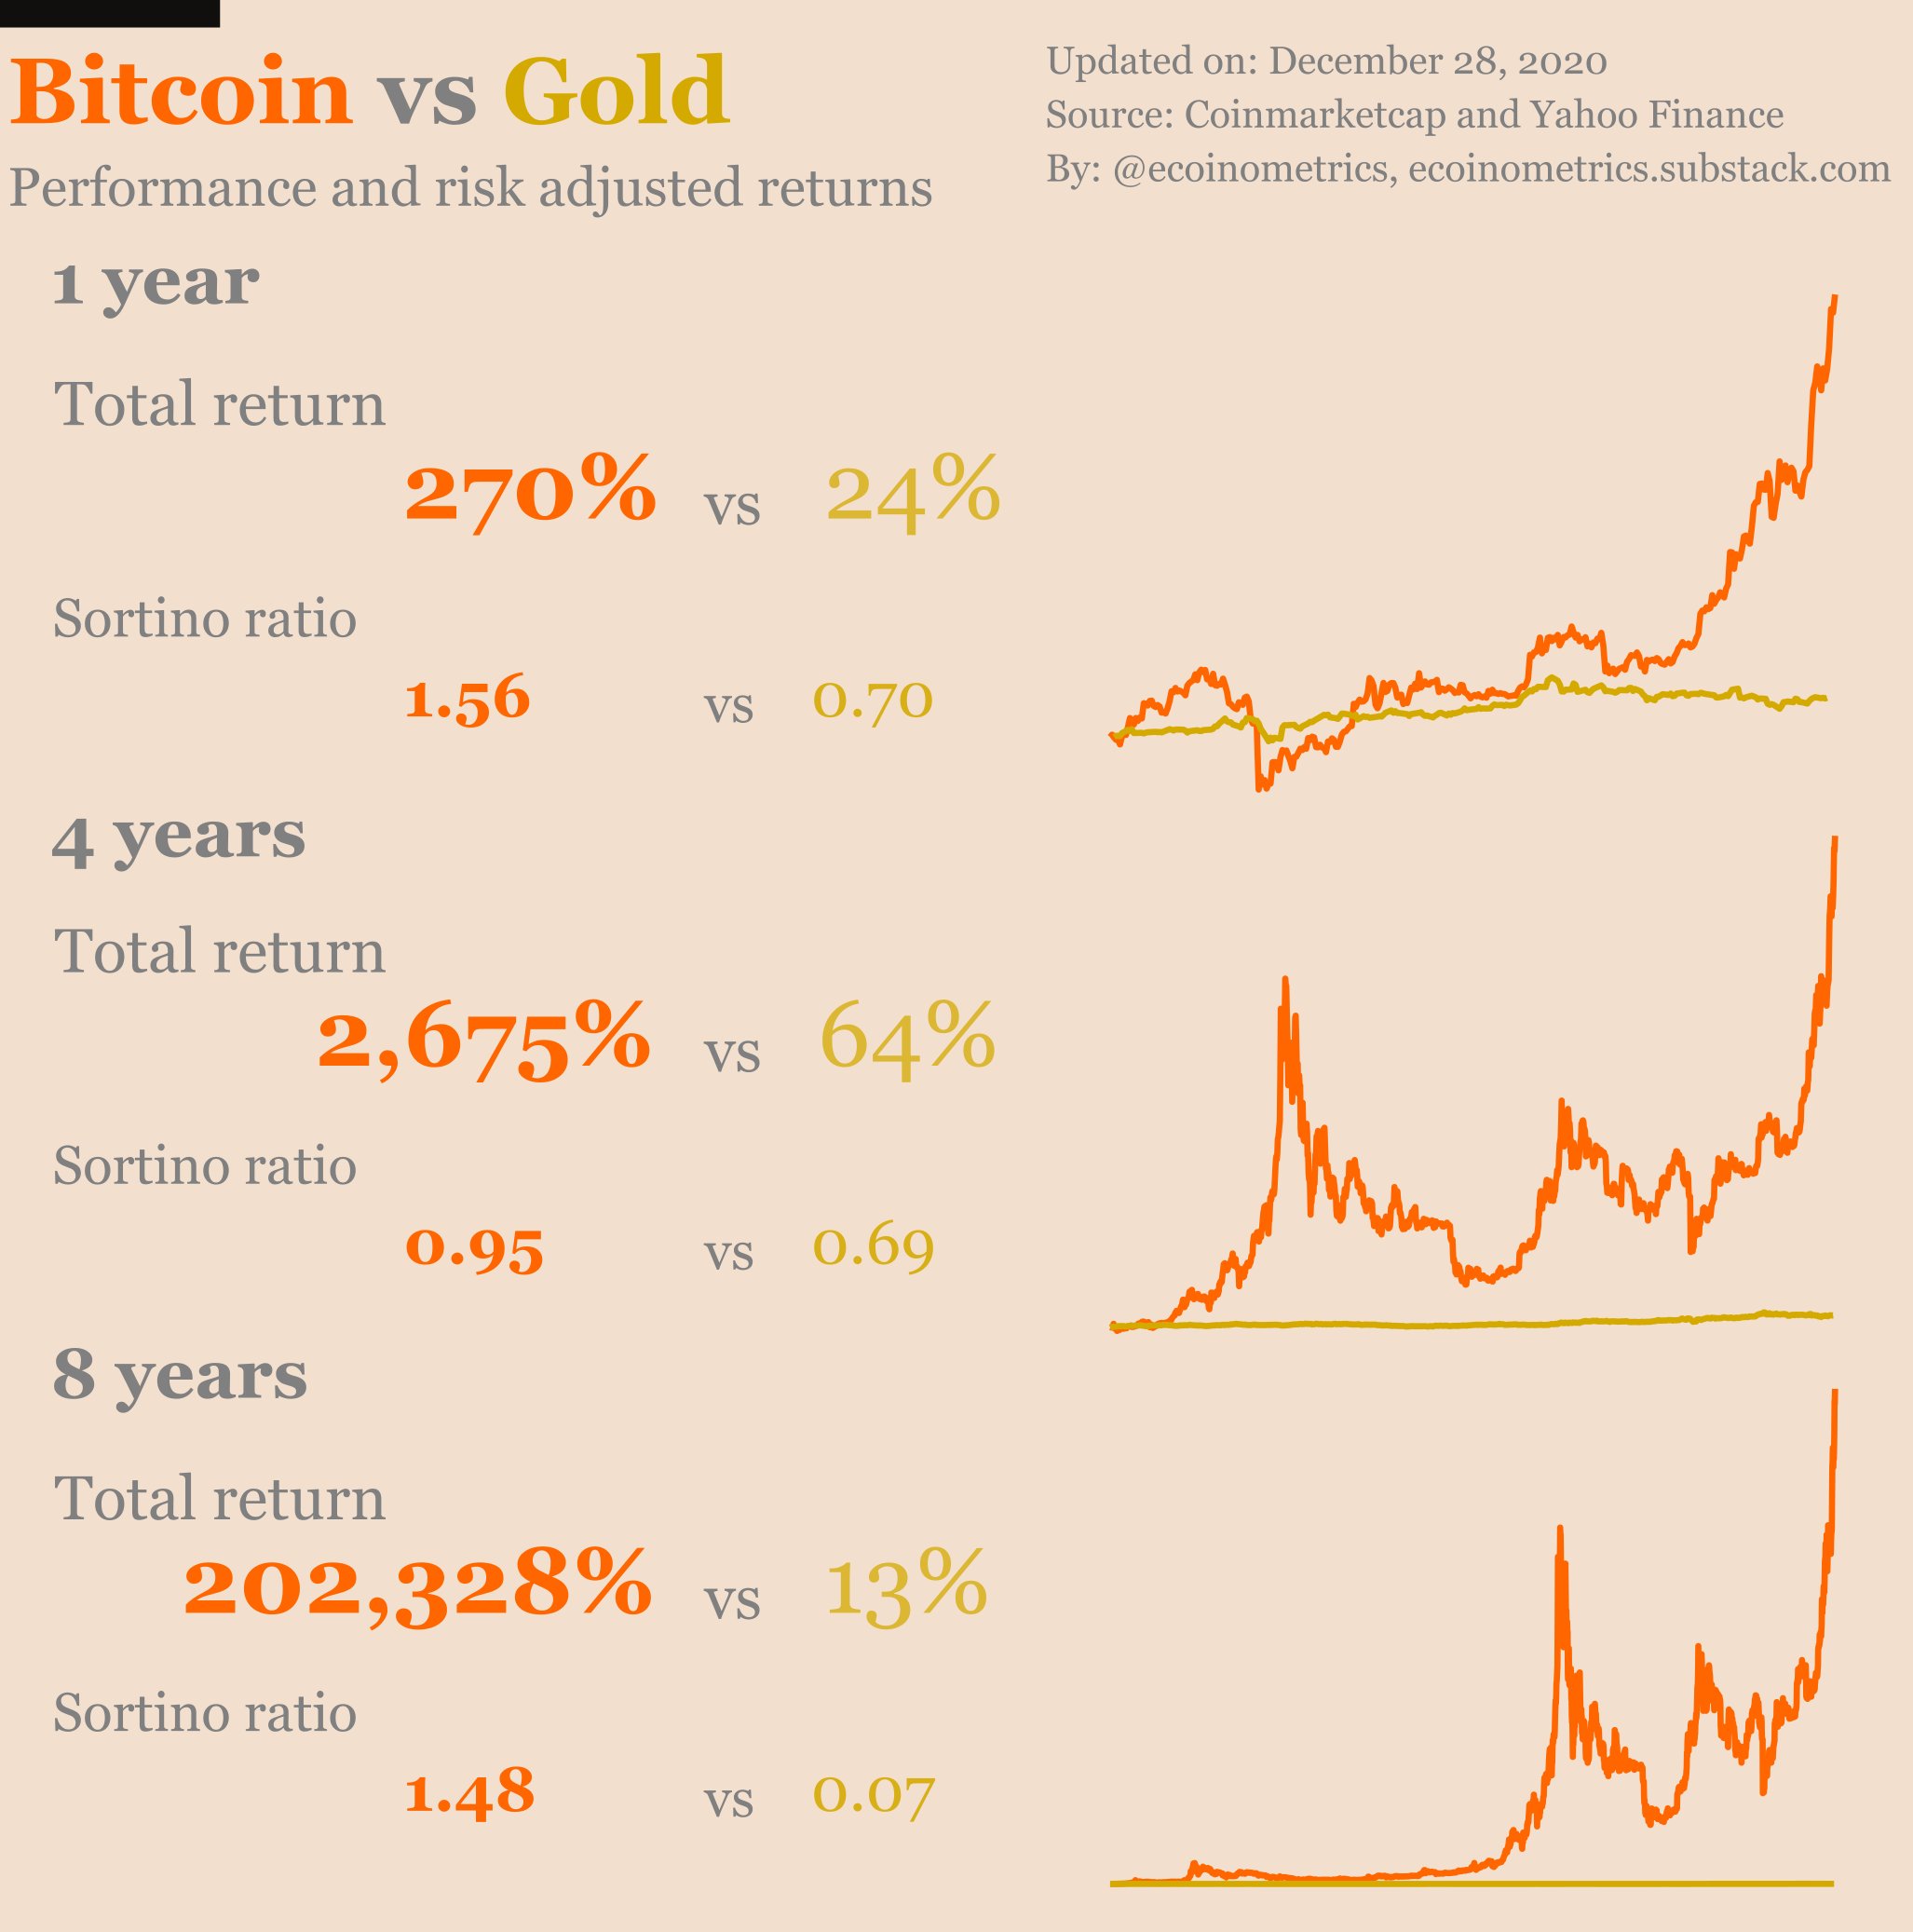 Are comparisons between Bitcoin and Gold absurd?